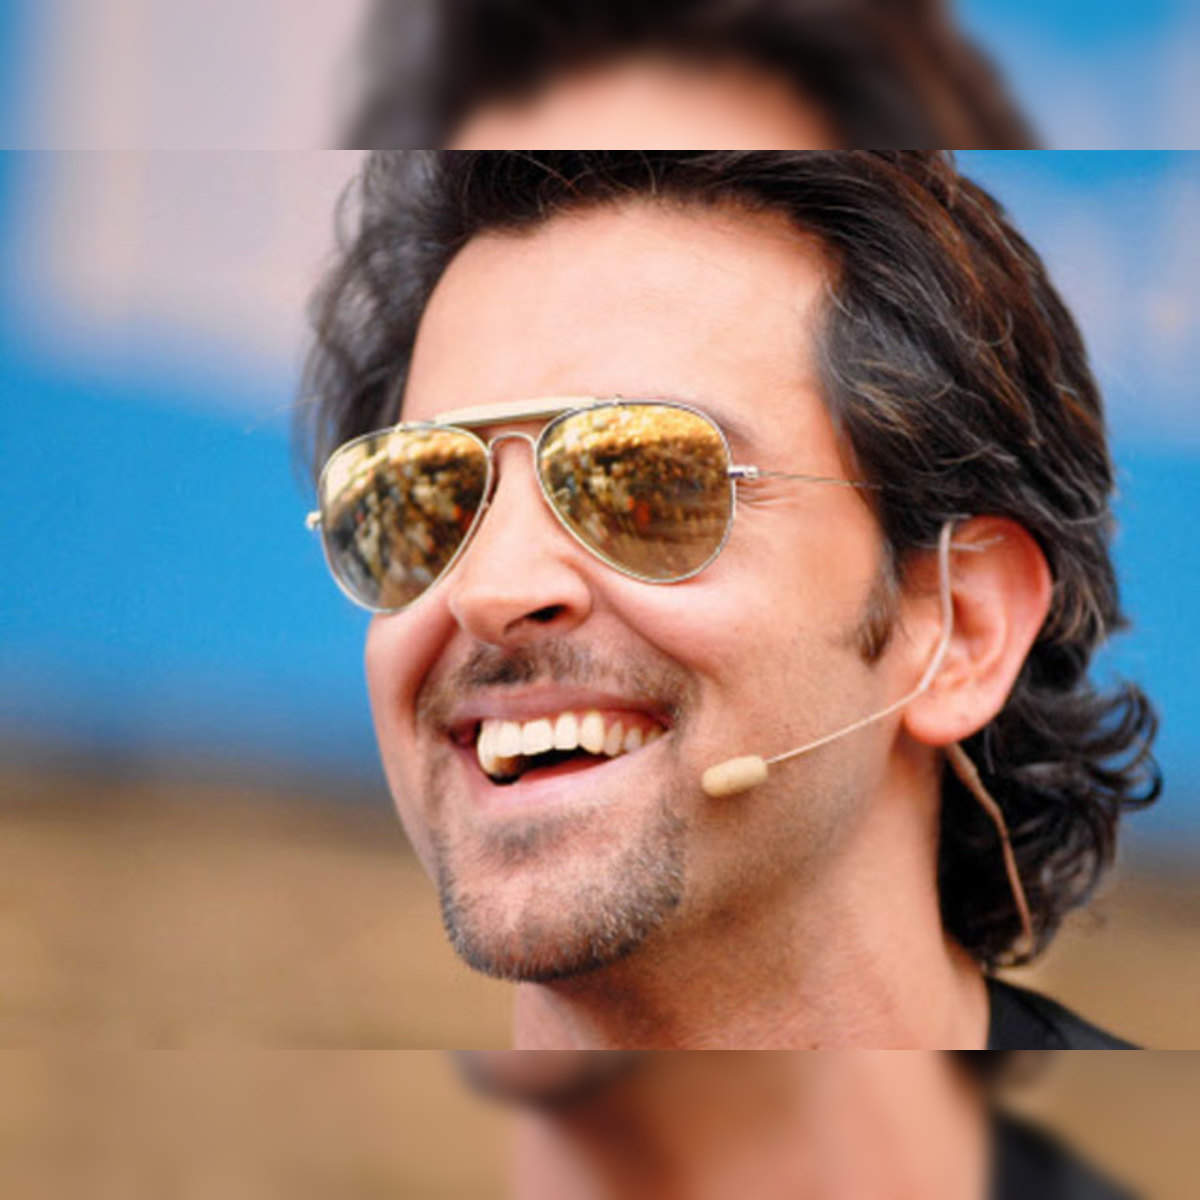 Hrithik Roshan sexiest man: UK poll names Hrithik Roshan as sexiest Asian  male of the decade - The Economic Times